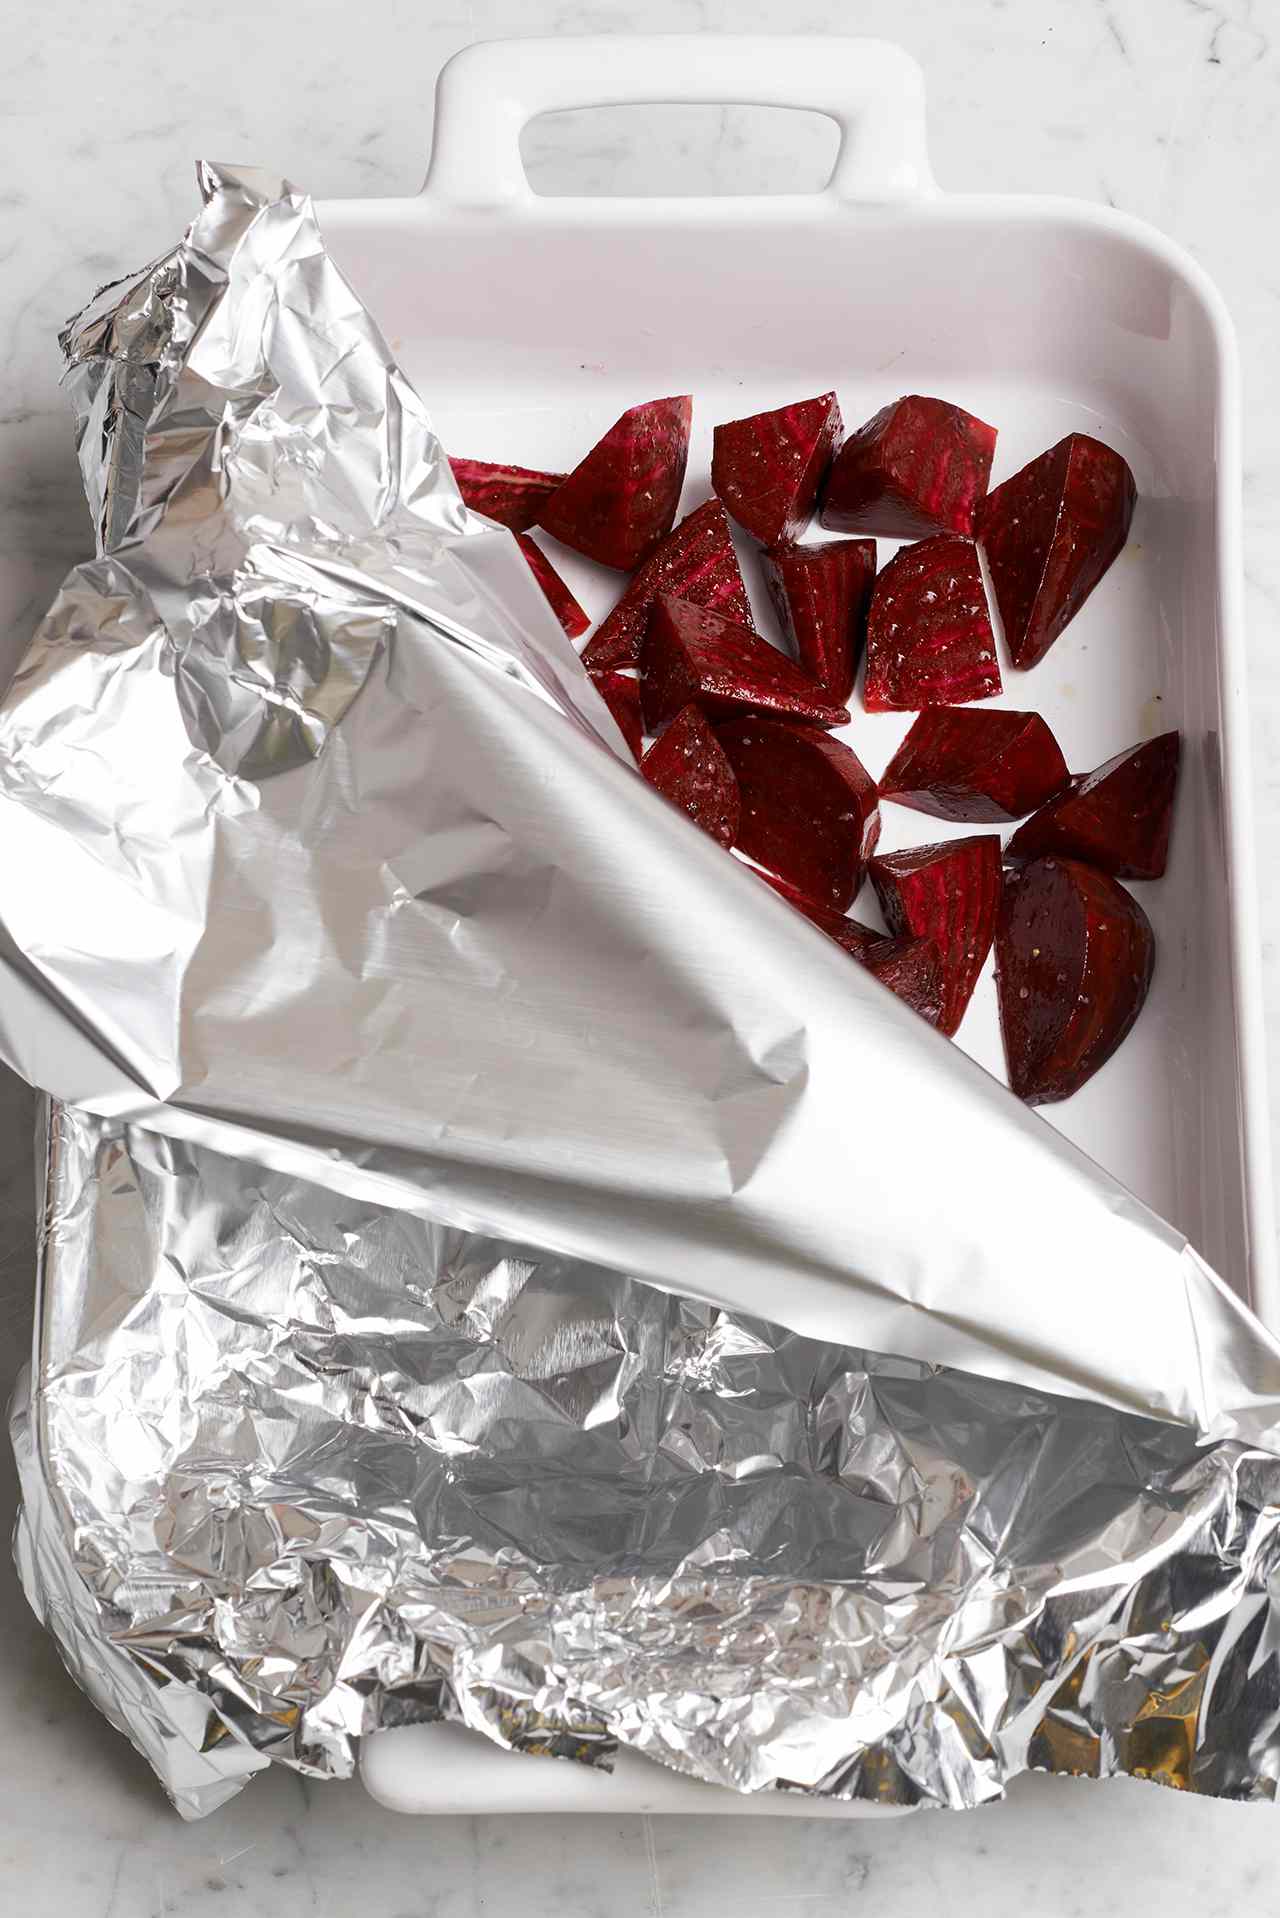 chopped beets in white baking dish with foil